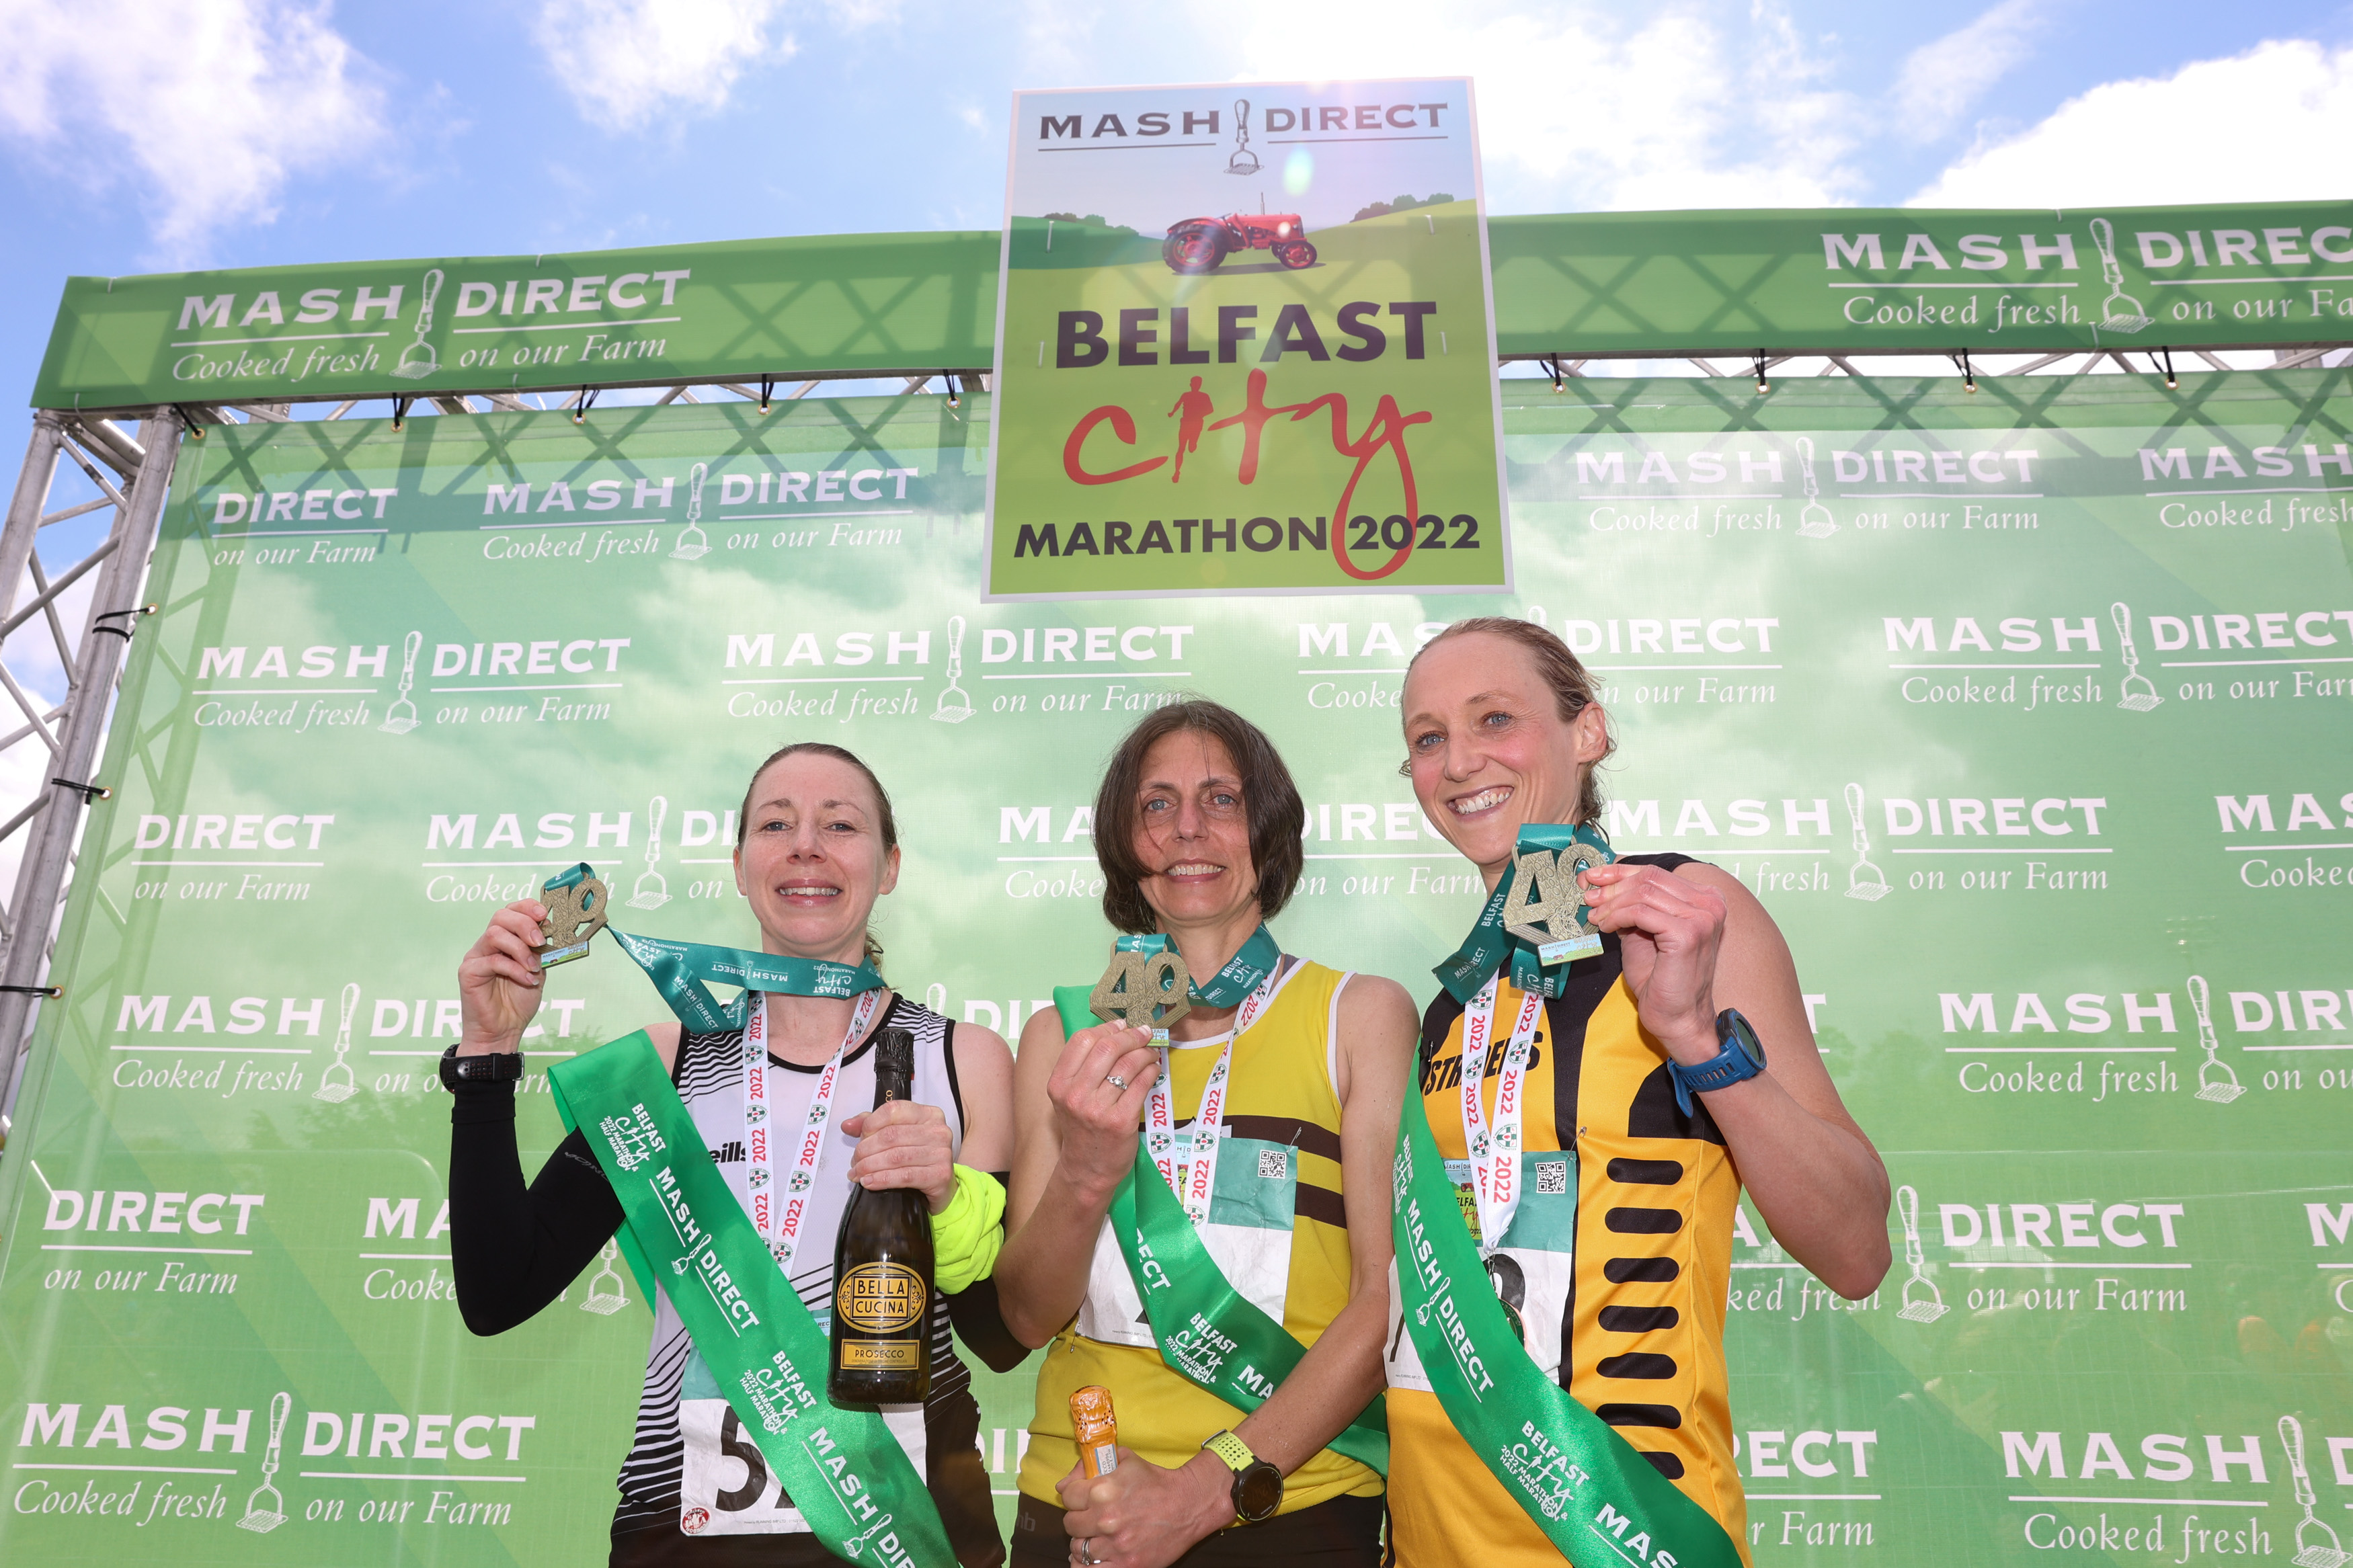 Ganiel Aiming For second Consecutive Victory in Belfast Marathon